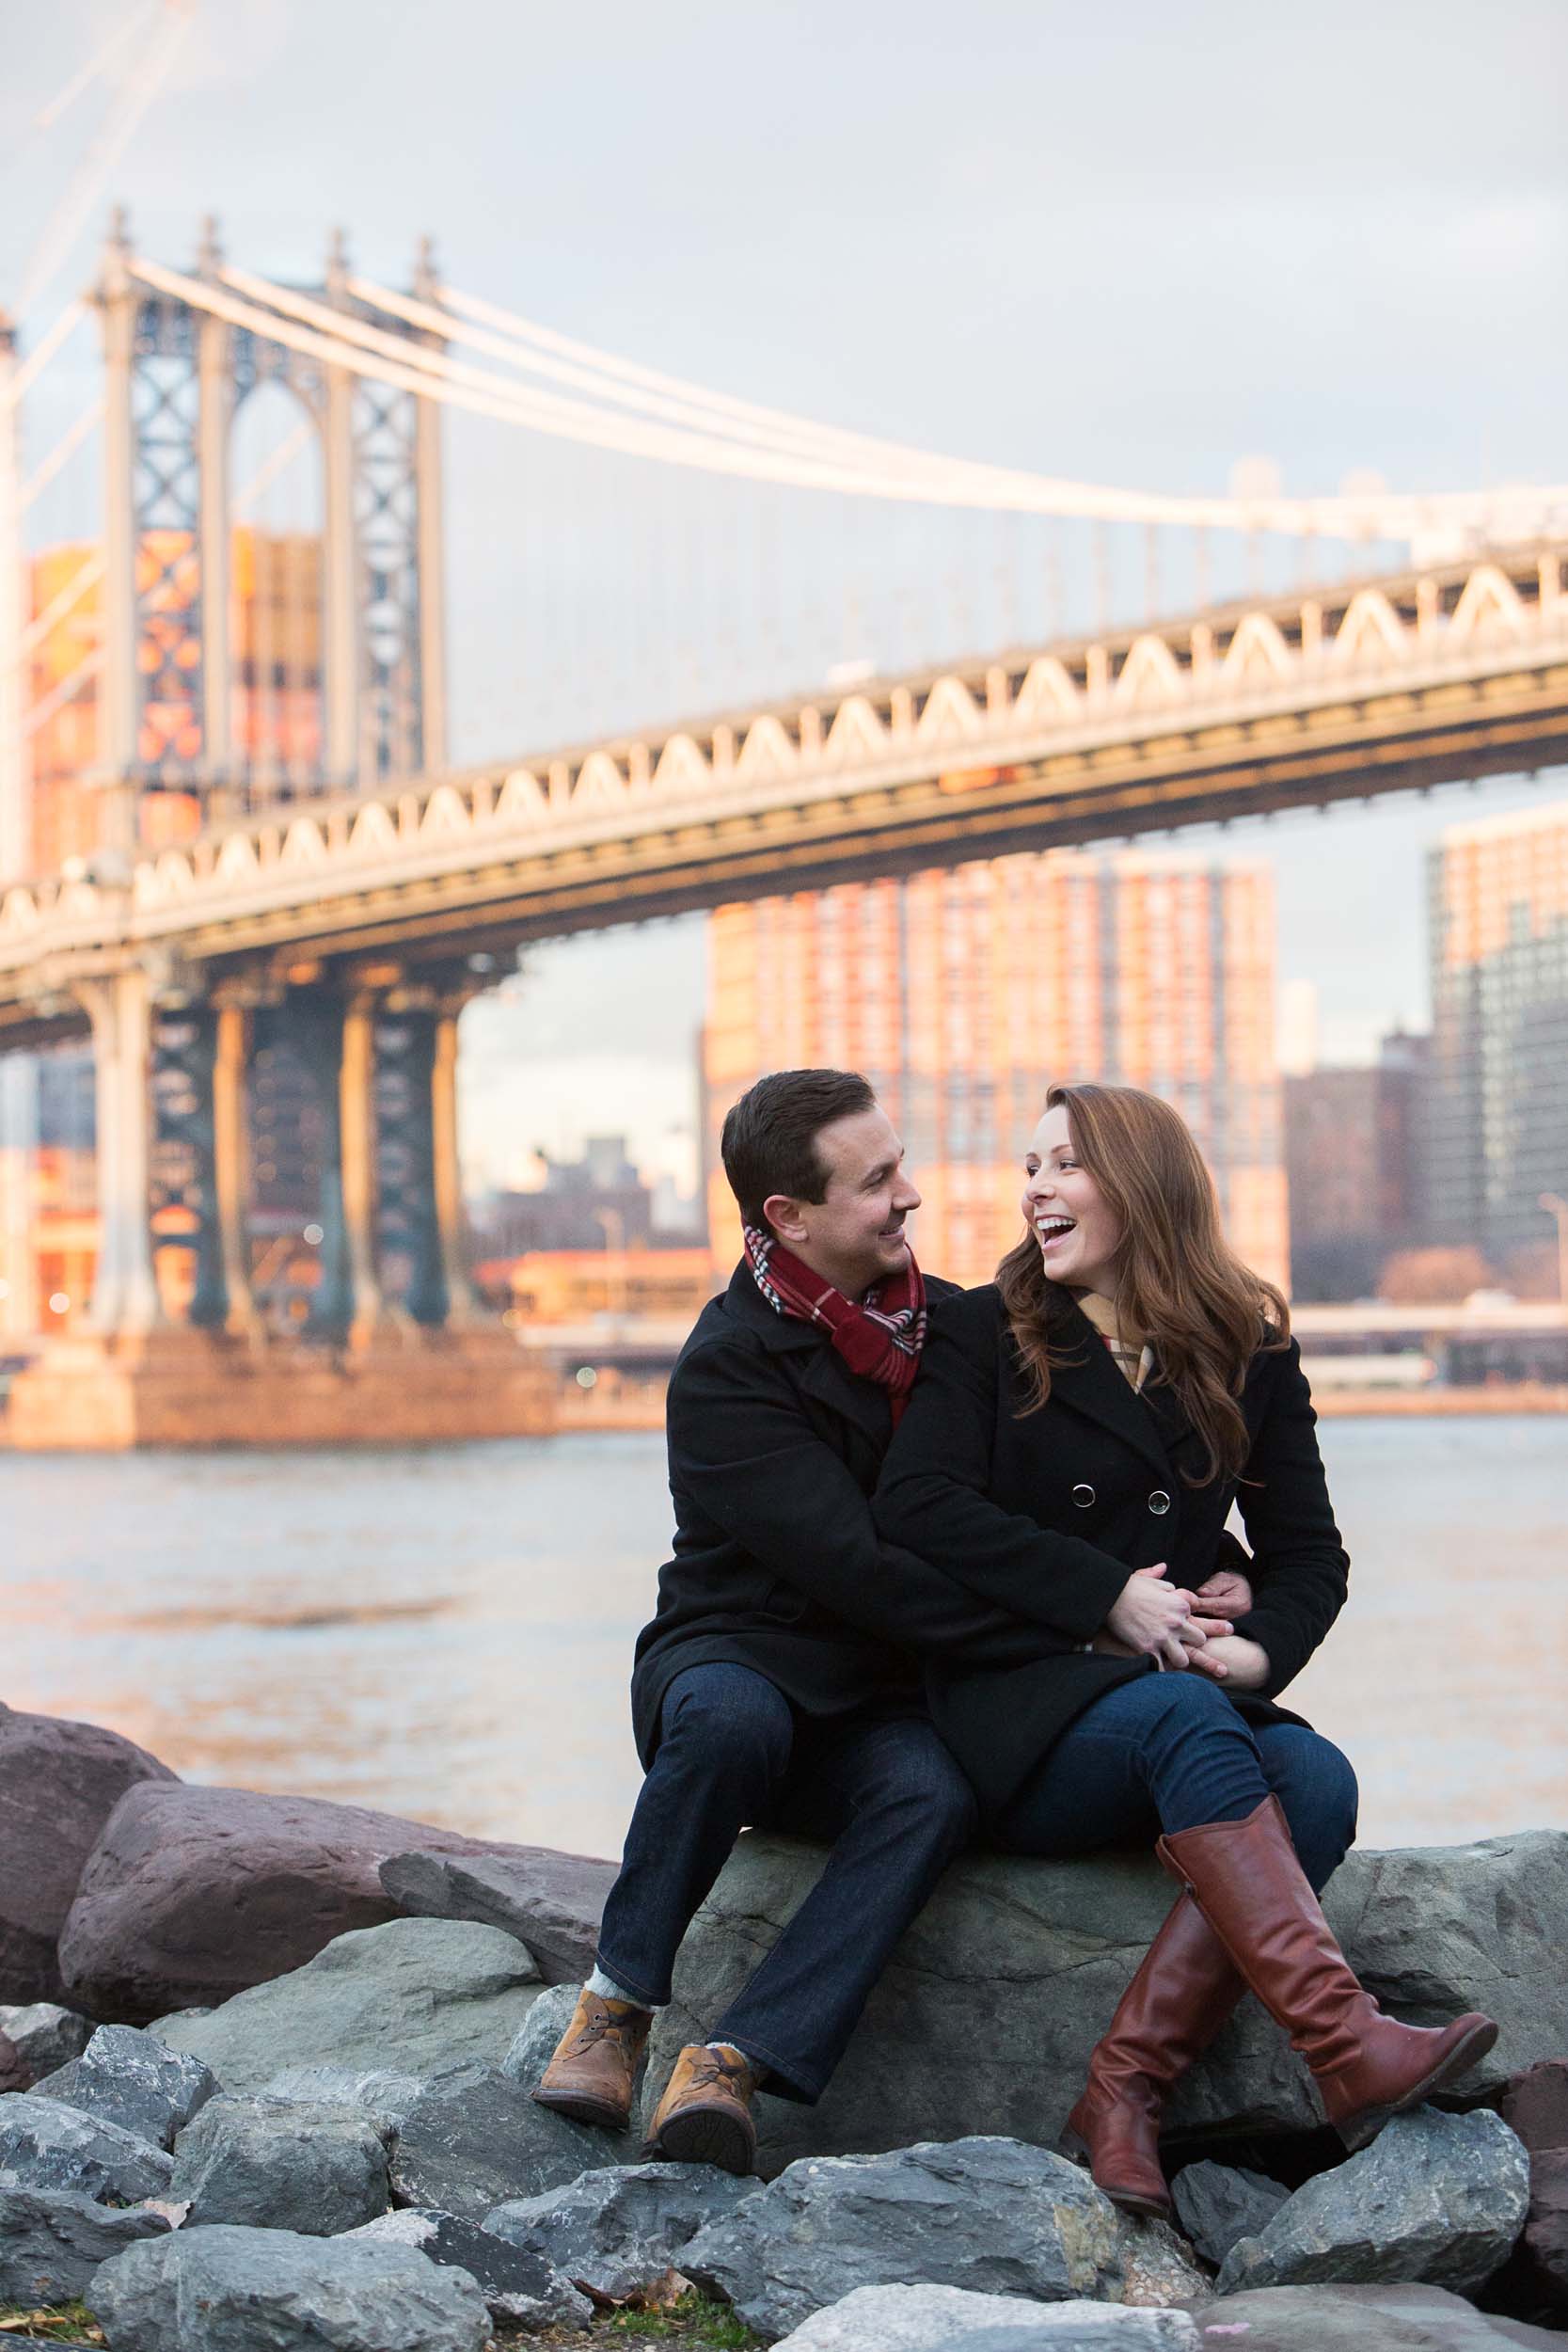 Couple sitting on rocks together laughing with the Brooklyn Bridge in the background in New York City, USA